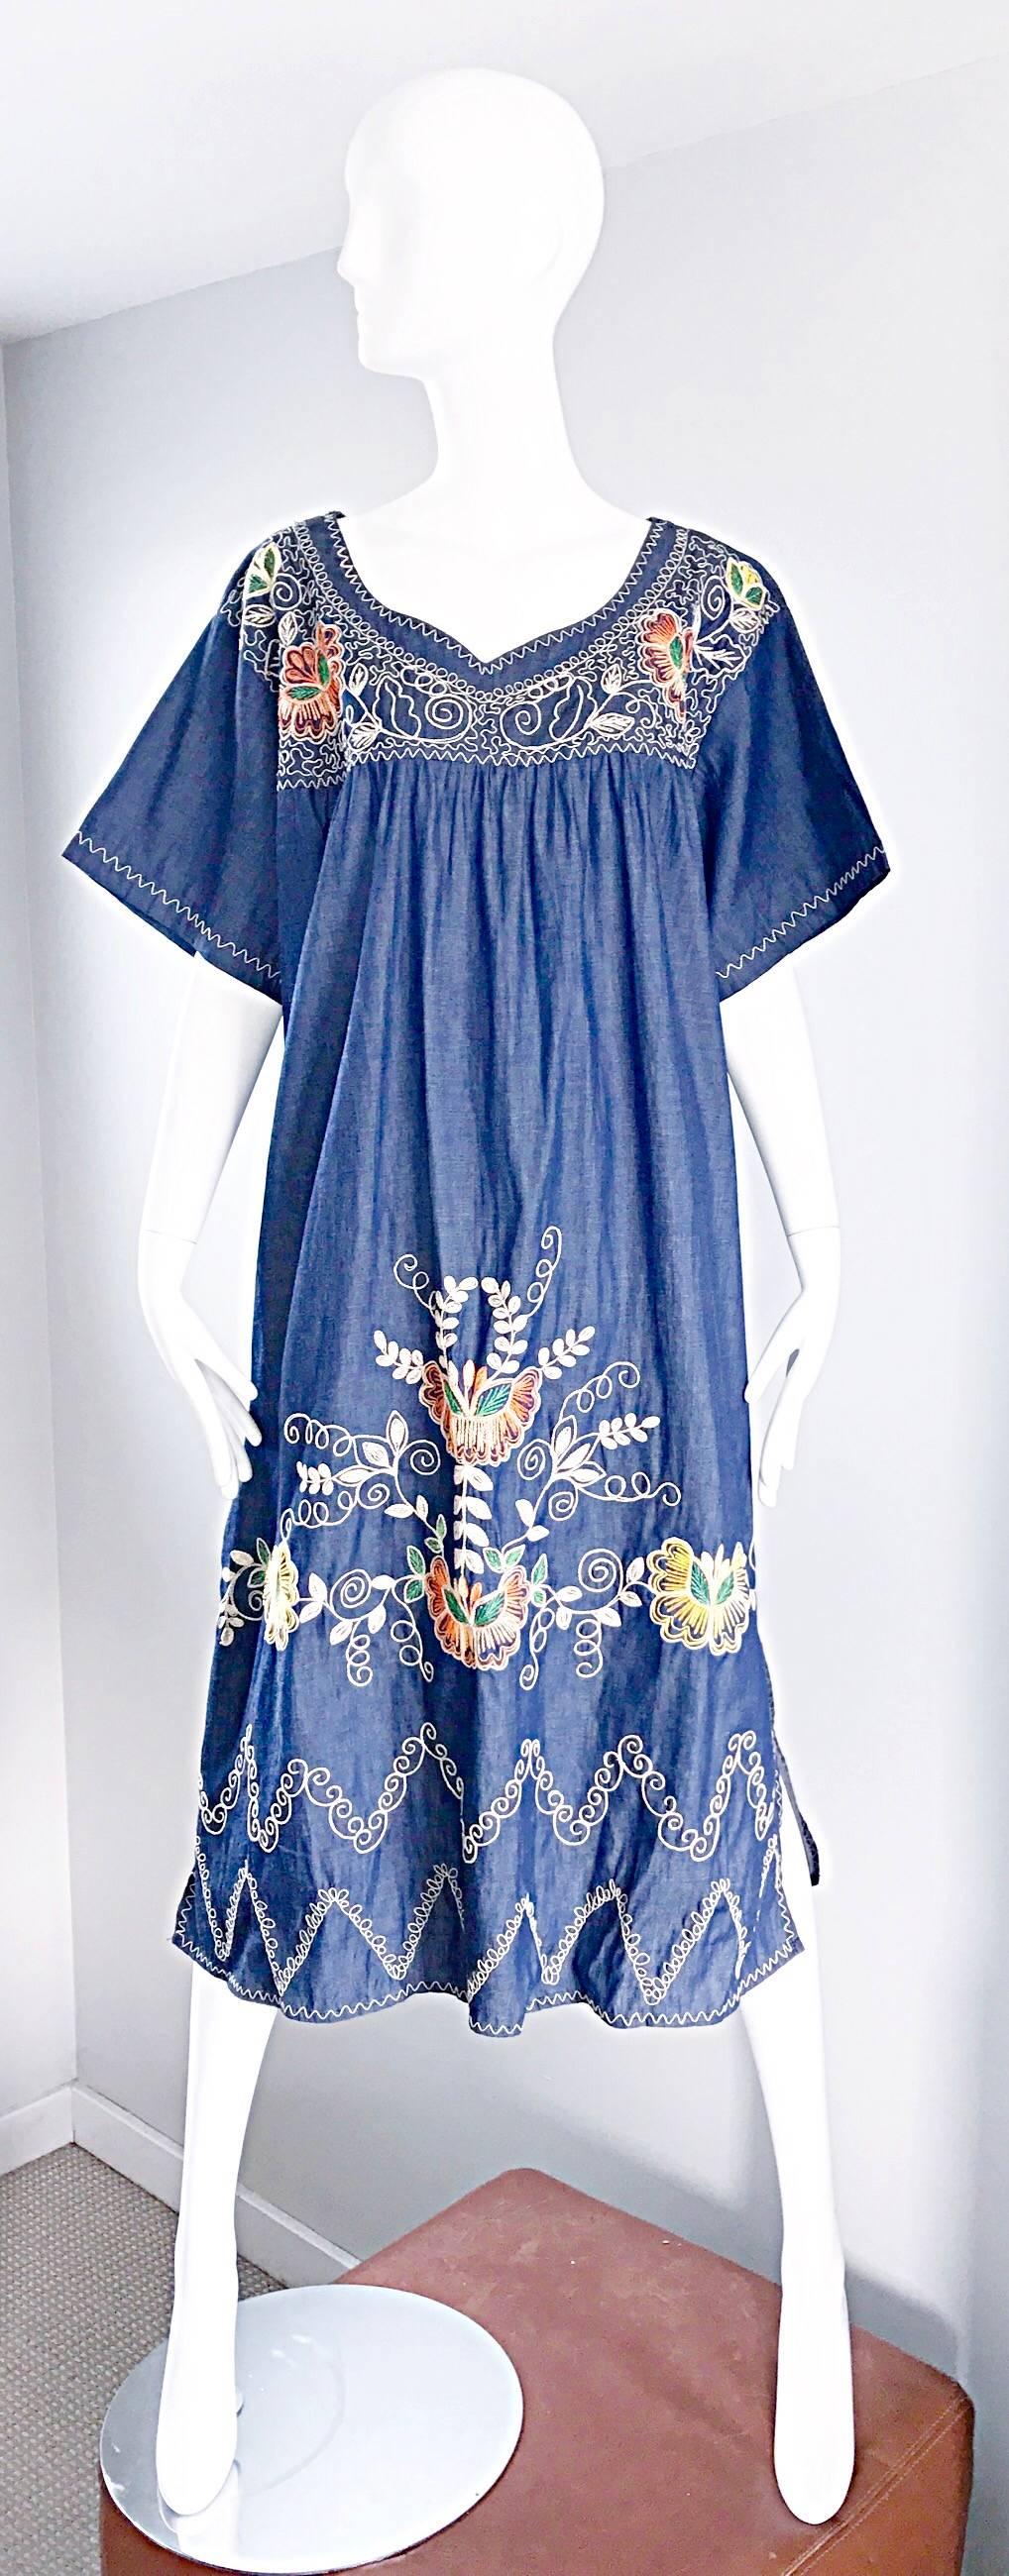 Amazing 1970s lightweight boho cotton denim hand embroidered kaftan dress! Features orange, green, yellow, and white embroidery throughout. Lightweight and soft blue jean / denim material. Intricate pleating at bust. Great belted or alone. Perfect